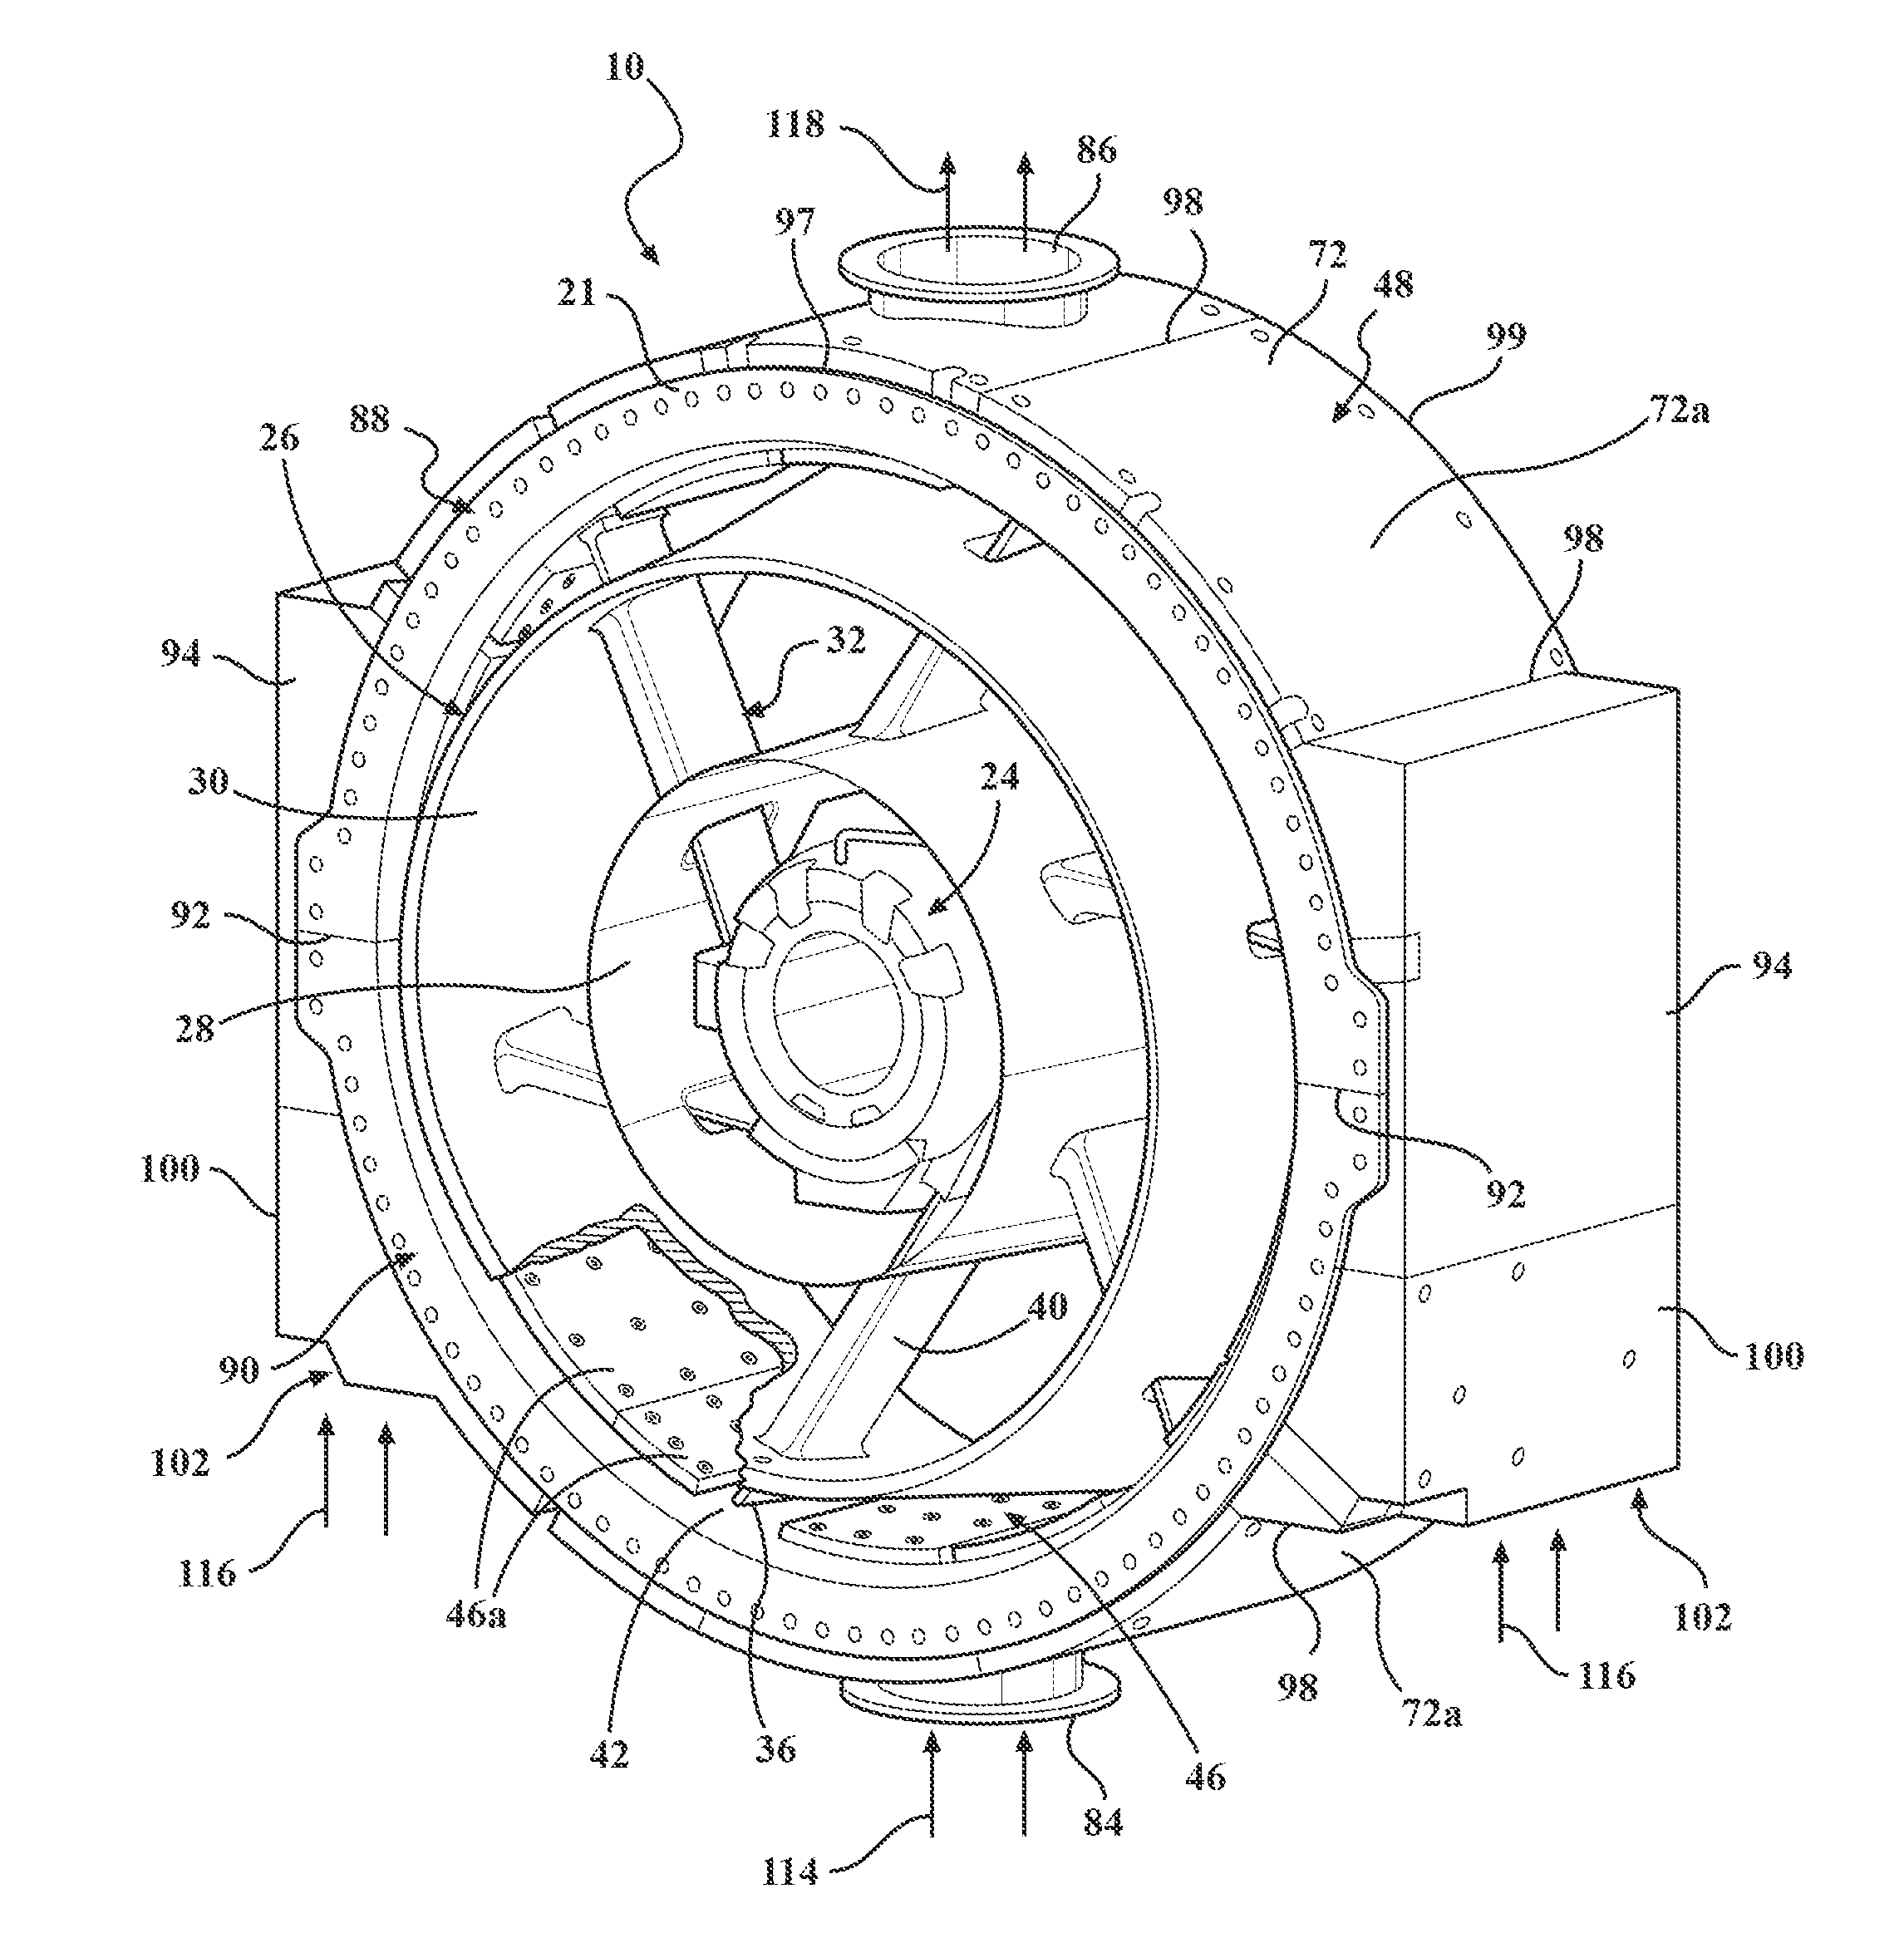 Gas turbine outer case active ambient cooling including air exhaust into a sub-ambient region of exhaust flow